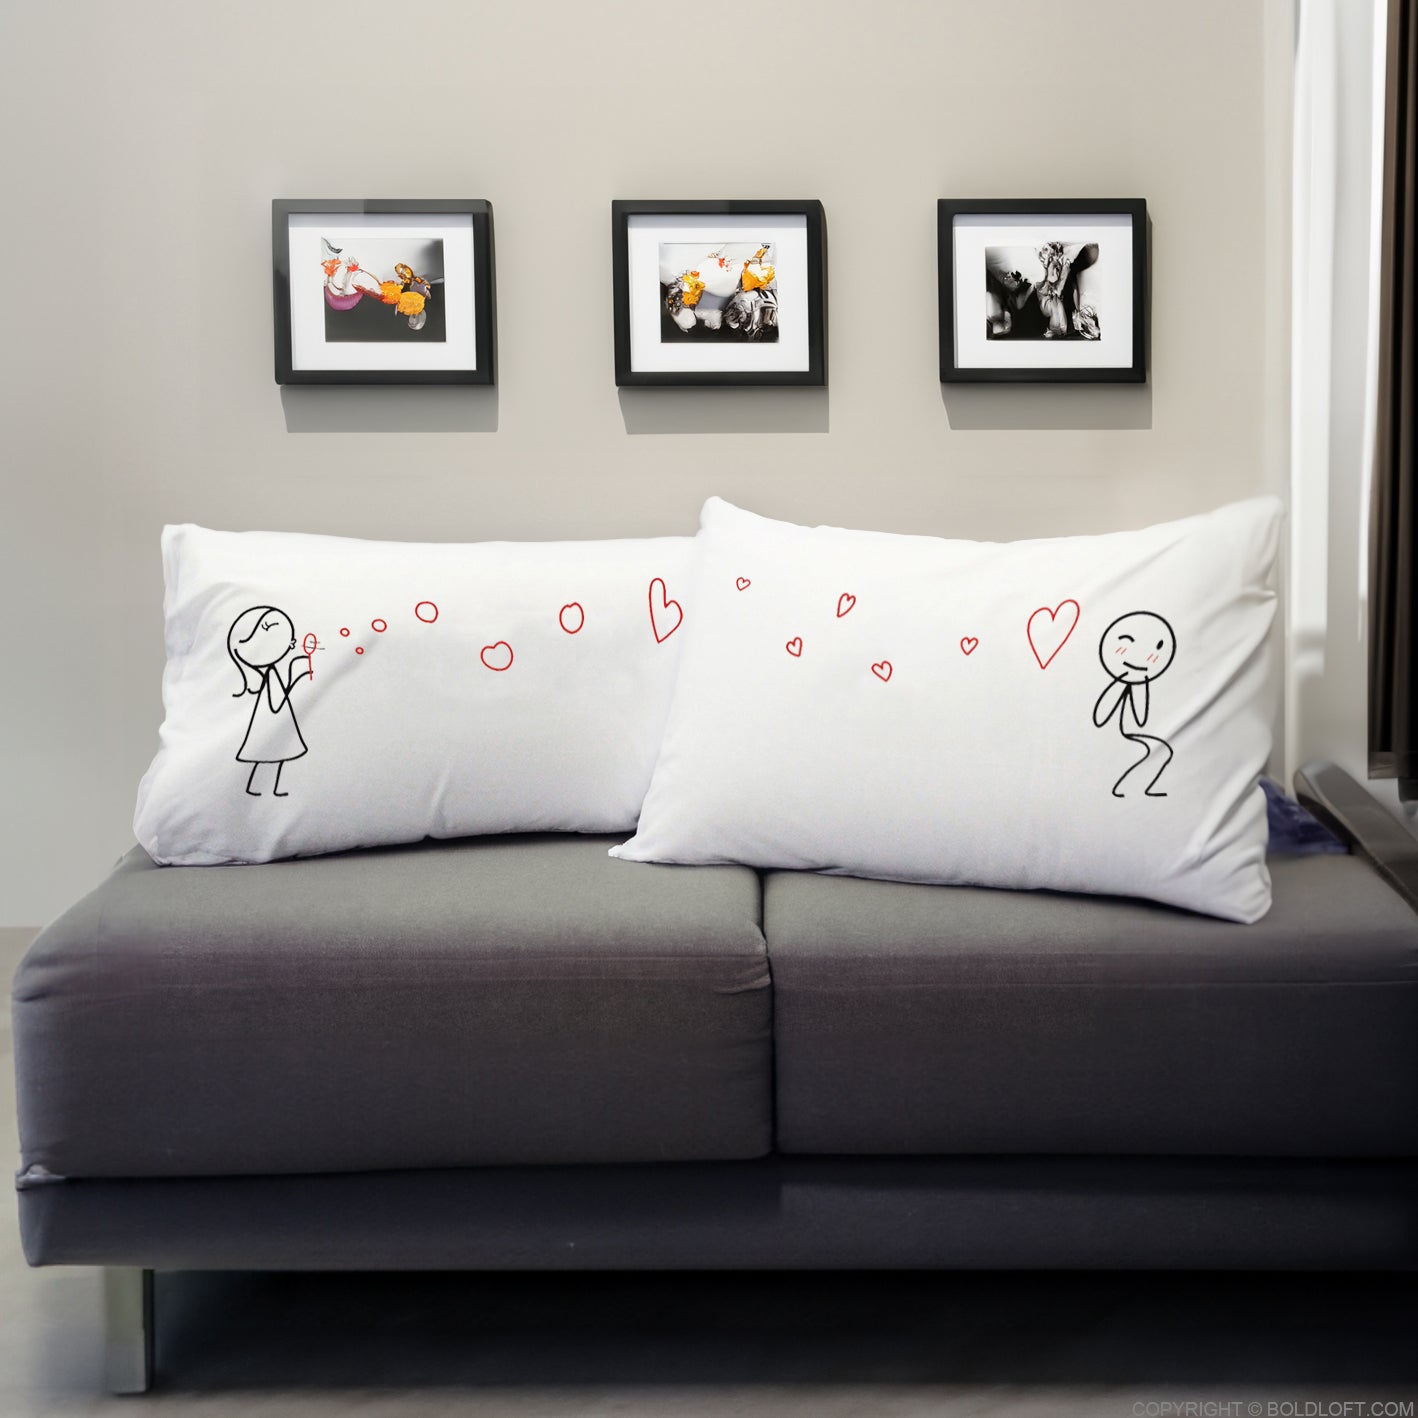 BoldLoft From My Heart to Yours Couple Pillowcases feature a girl blows heartshaped bubbles to a boy, a whimsical gift for him